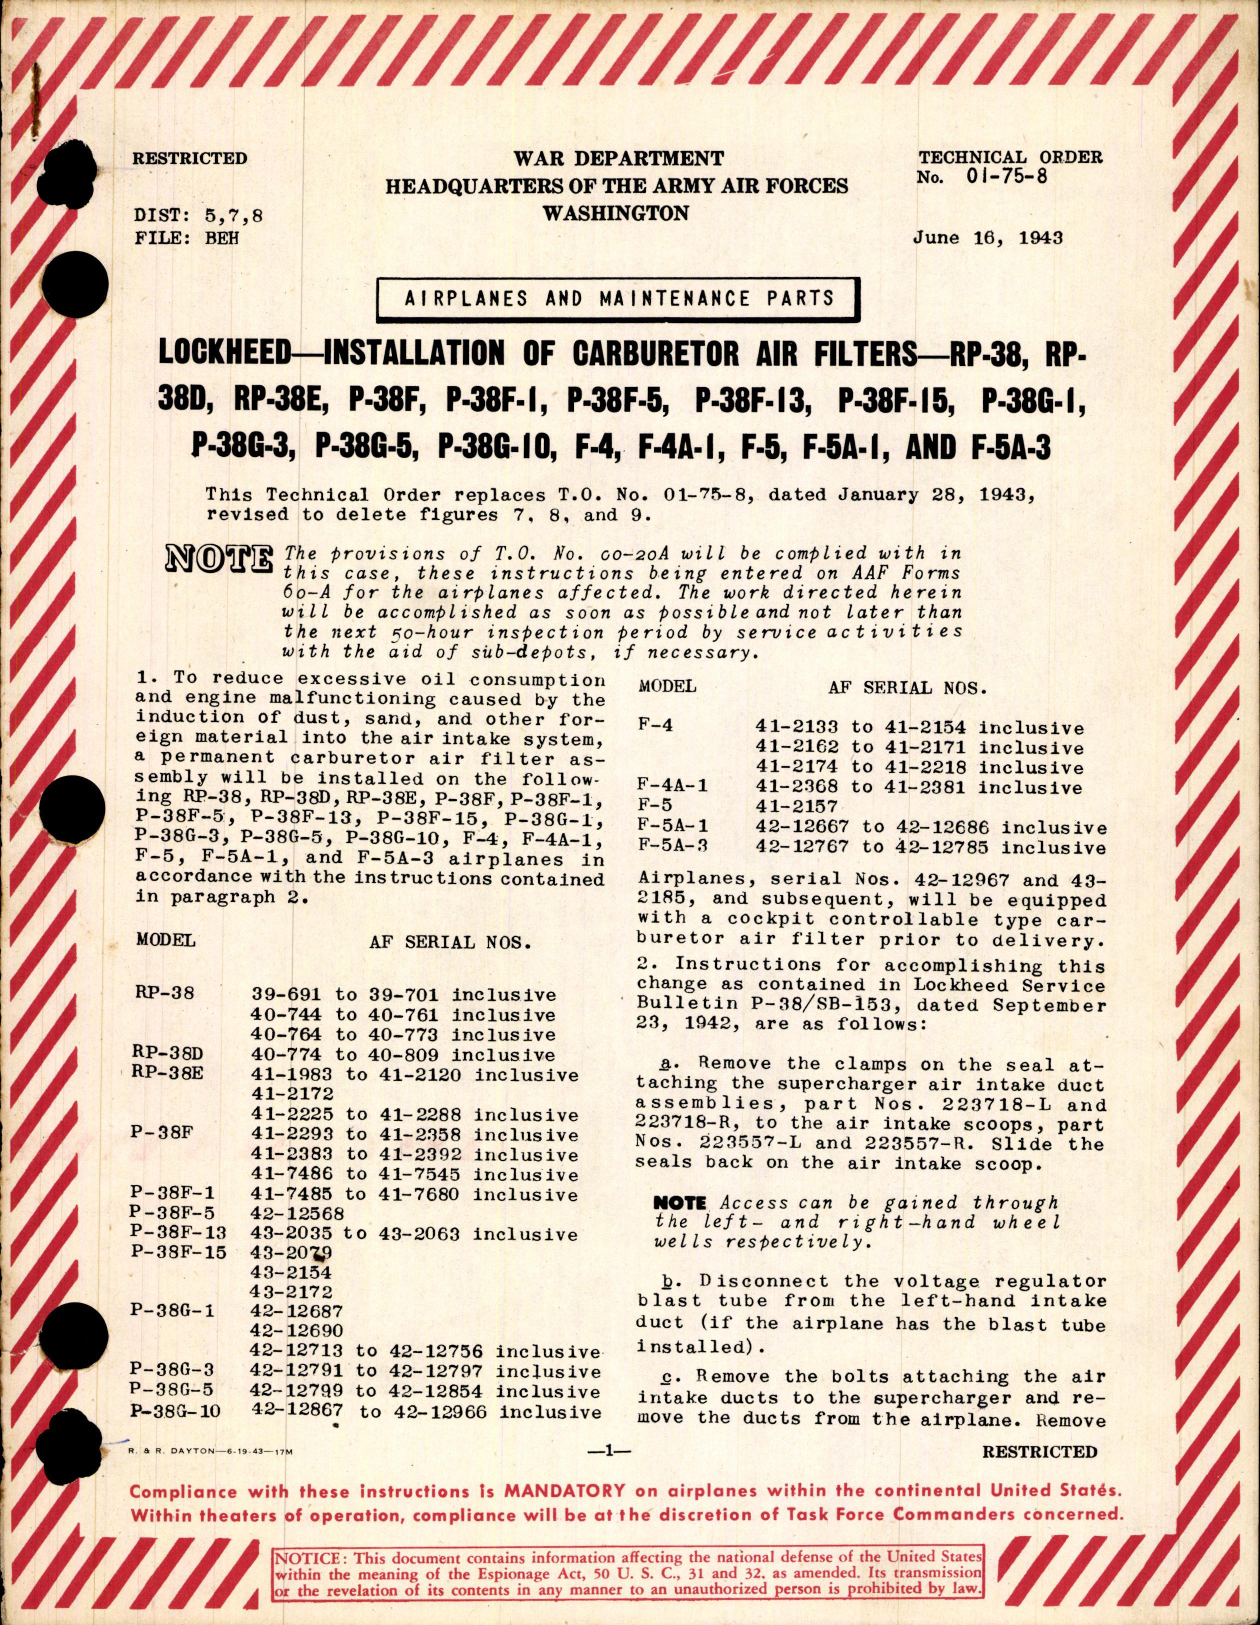 Sample page 1 from AirCorps Library document: Installation of Carburetor Air Filters for P-38 Series